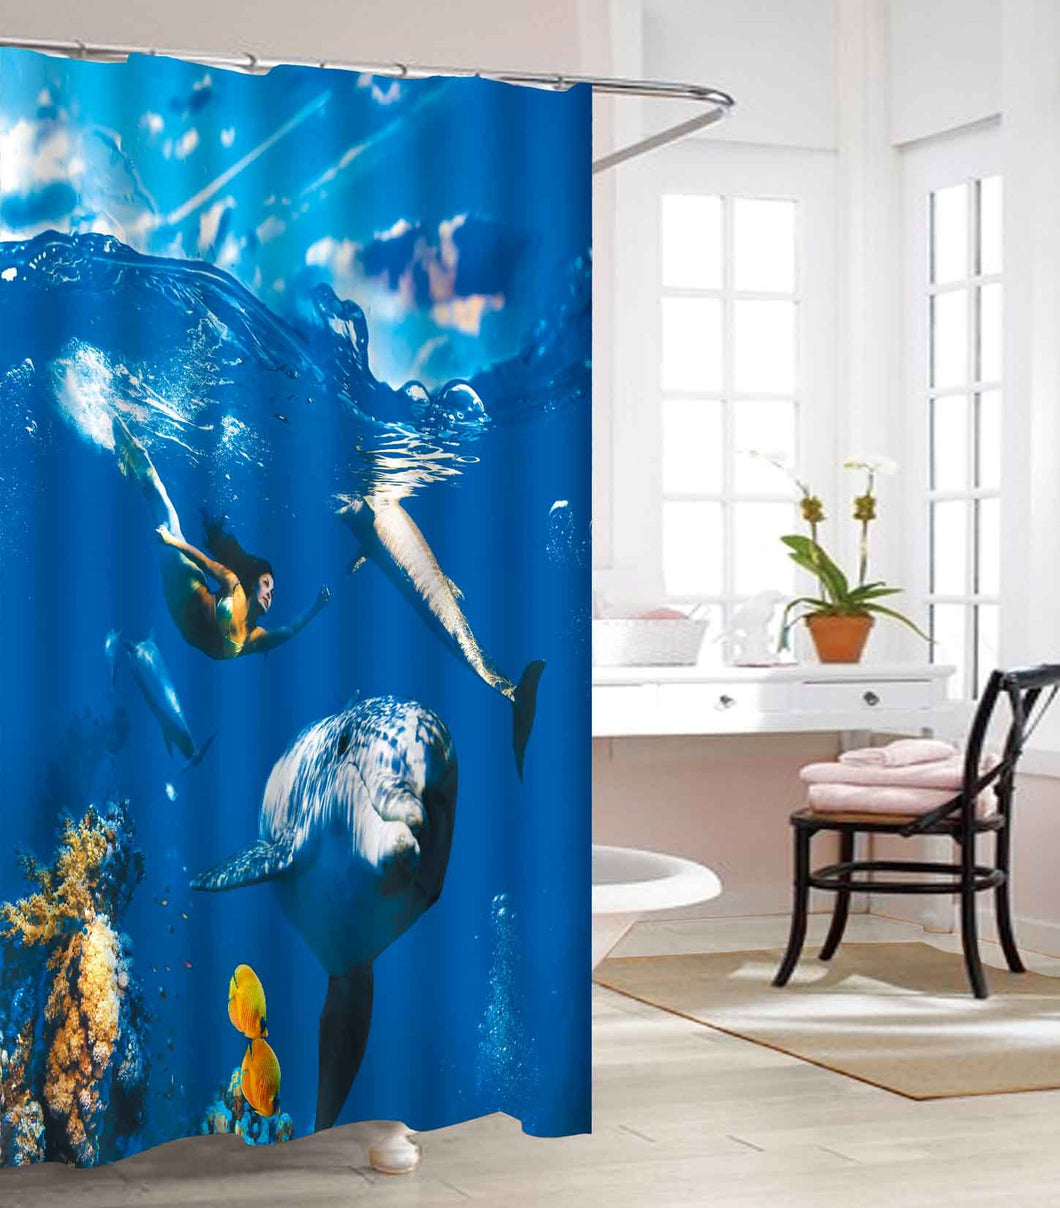 Vinyl Waterproof 3D Graphic Printed and Clear Bathroom Shower Curtain.